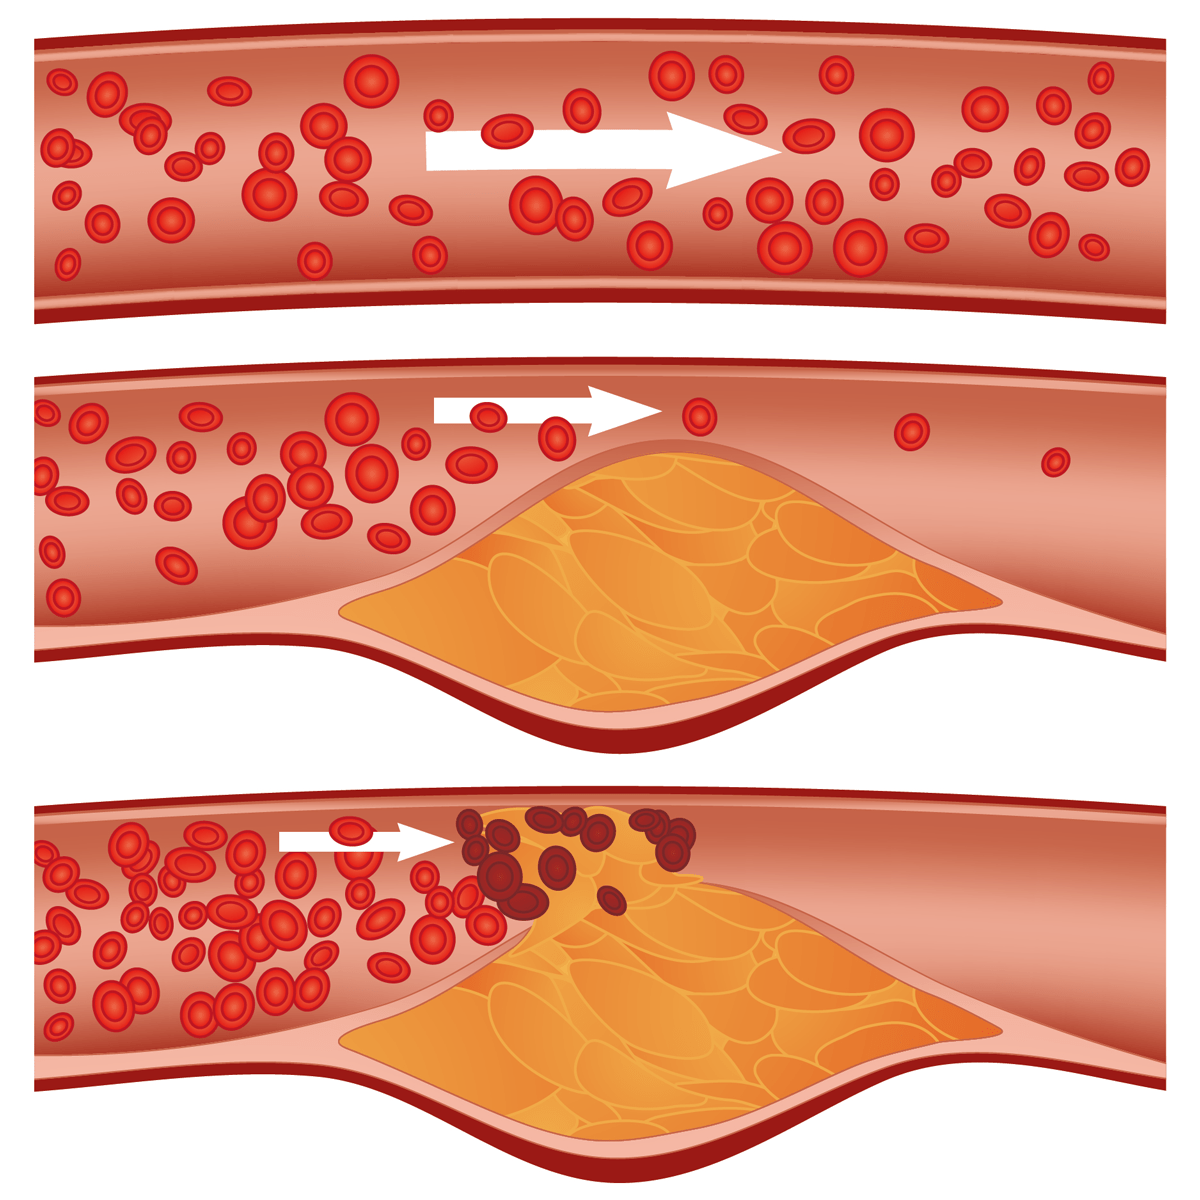 Fig. 1: Vascular occlusion: schematic of cholesterol plaque in artery (atherosclerosis) leading to ischemia.